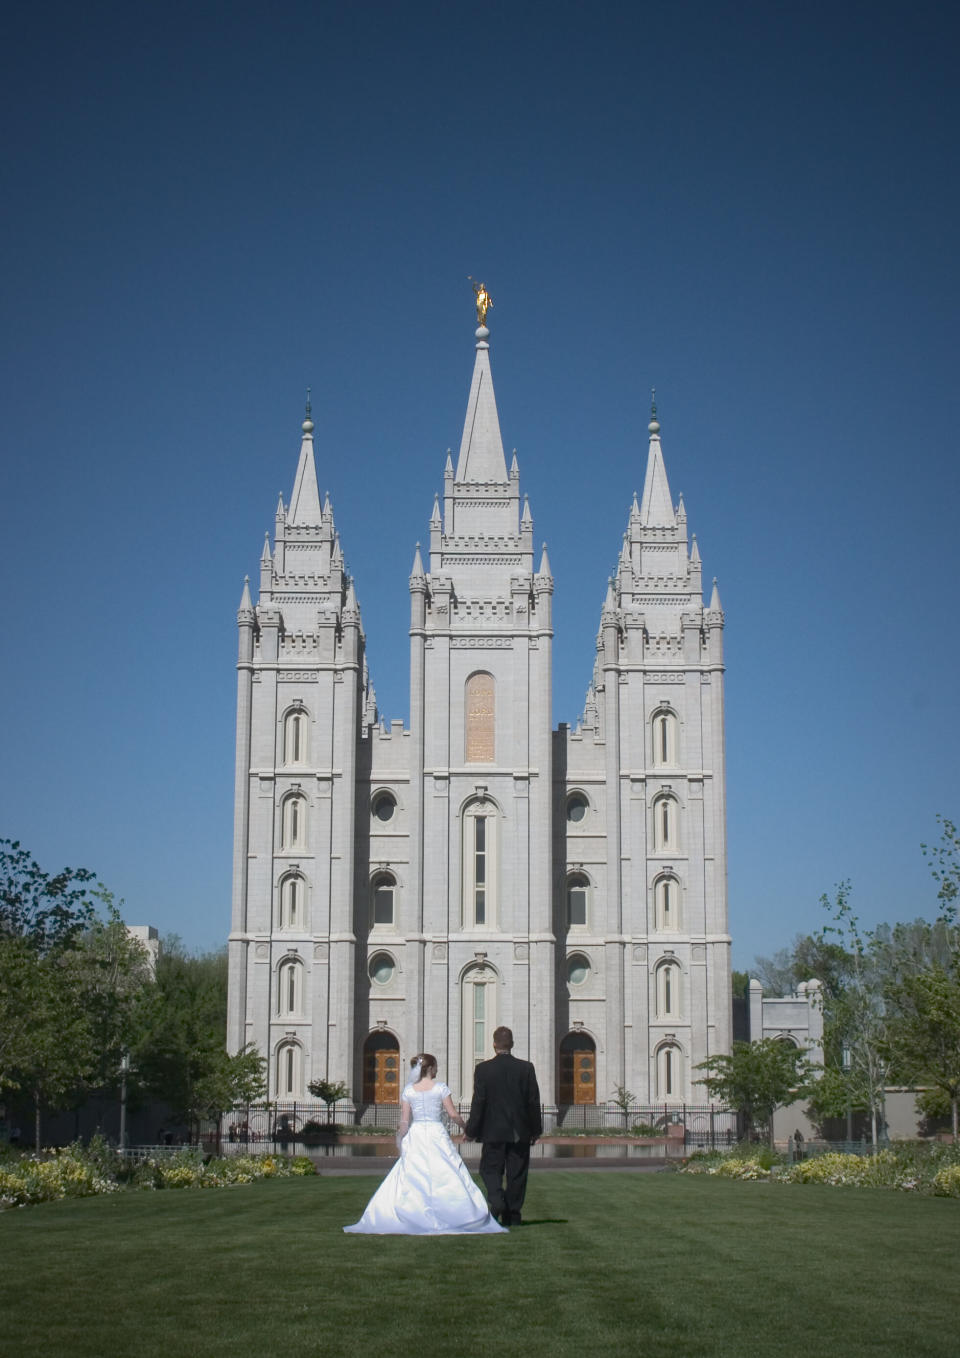 A couple poses outside the Salt Lake City temple in Utah. (Photo: jhack via Getty Images)